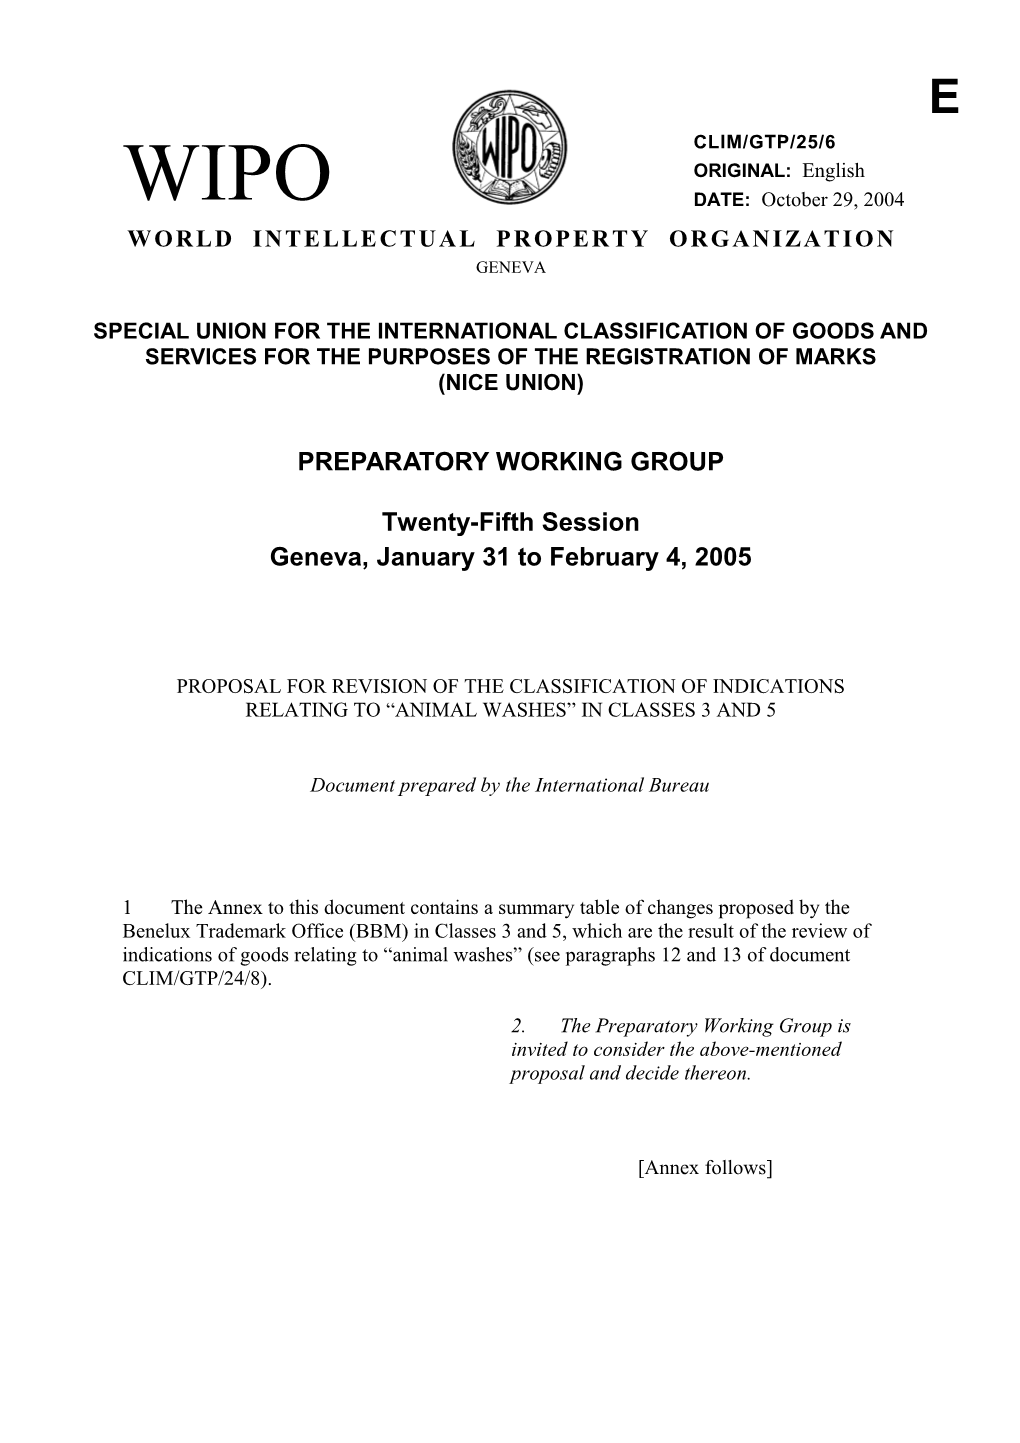 CLIM/GTP/25/6: Proposal for Revision of the Classification of Indications Relating to Animal